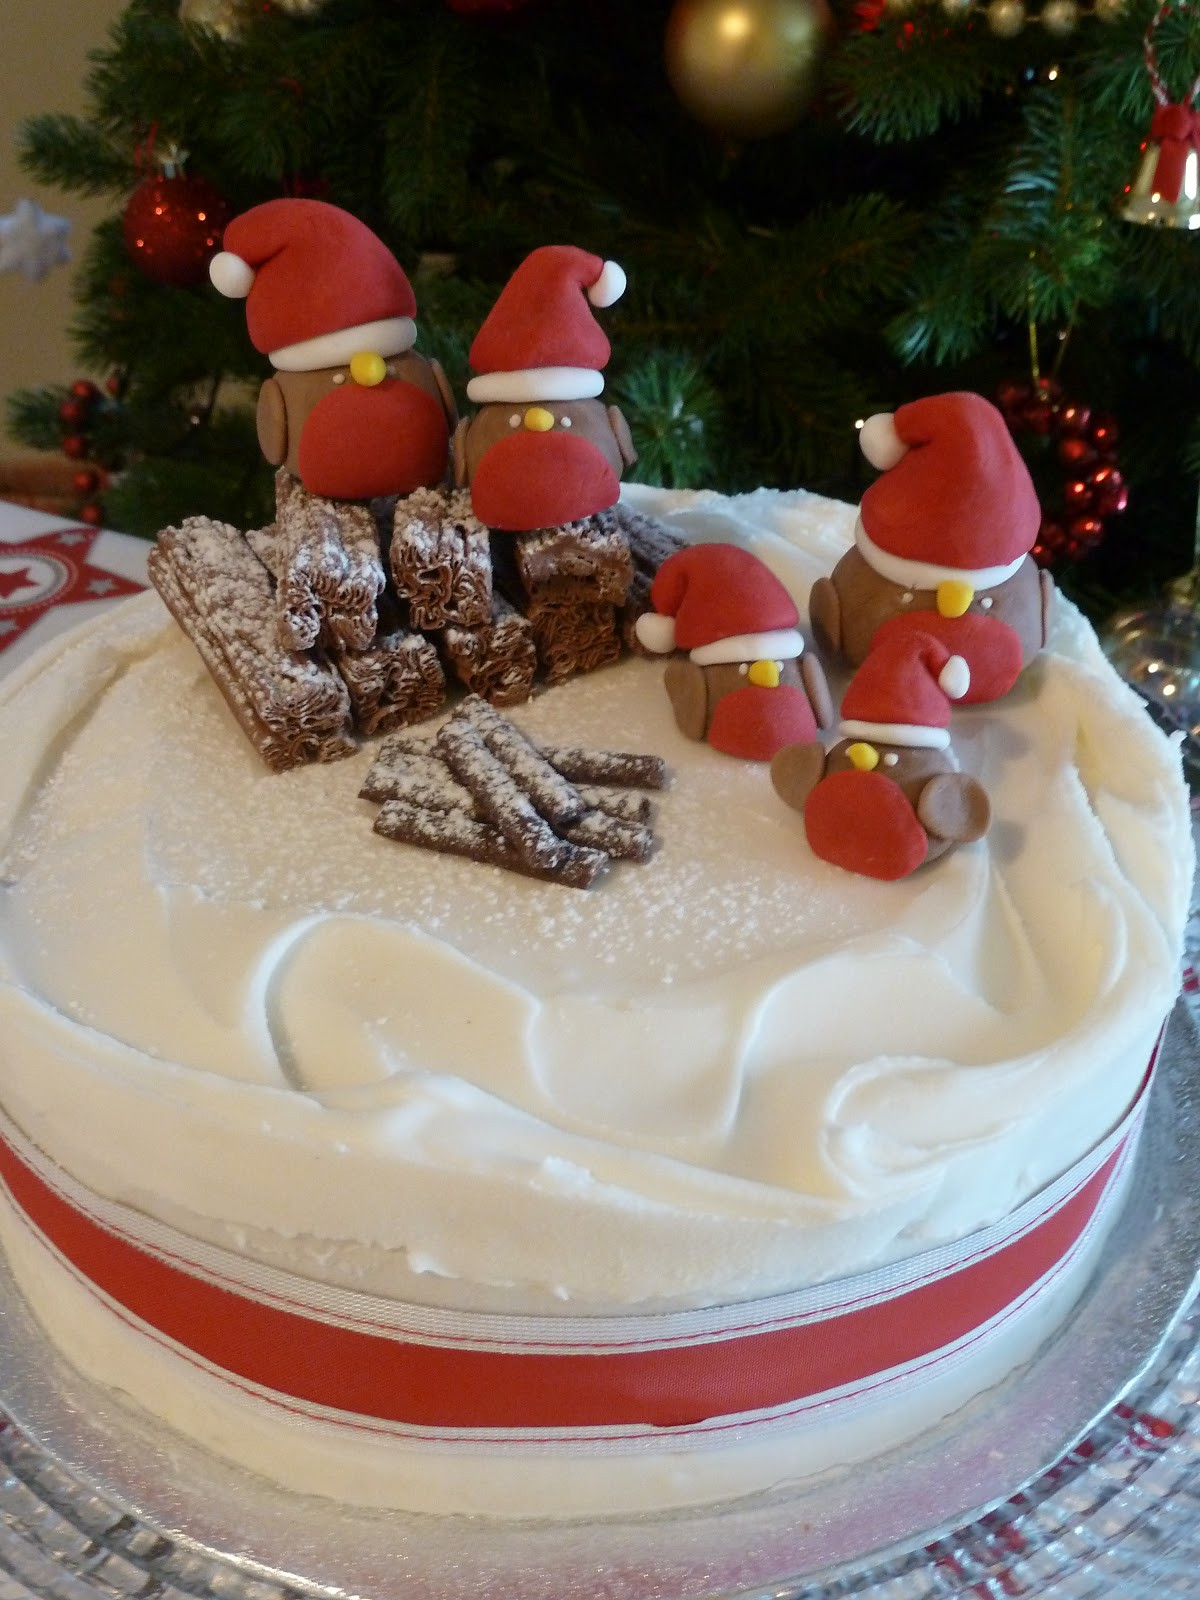 Christmas Cakes Icing
 Christmas Cake decorated with swirled royal icing